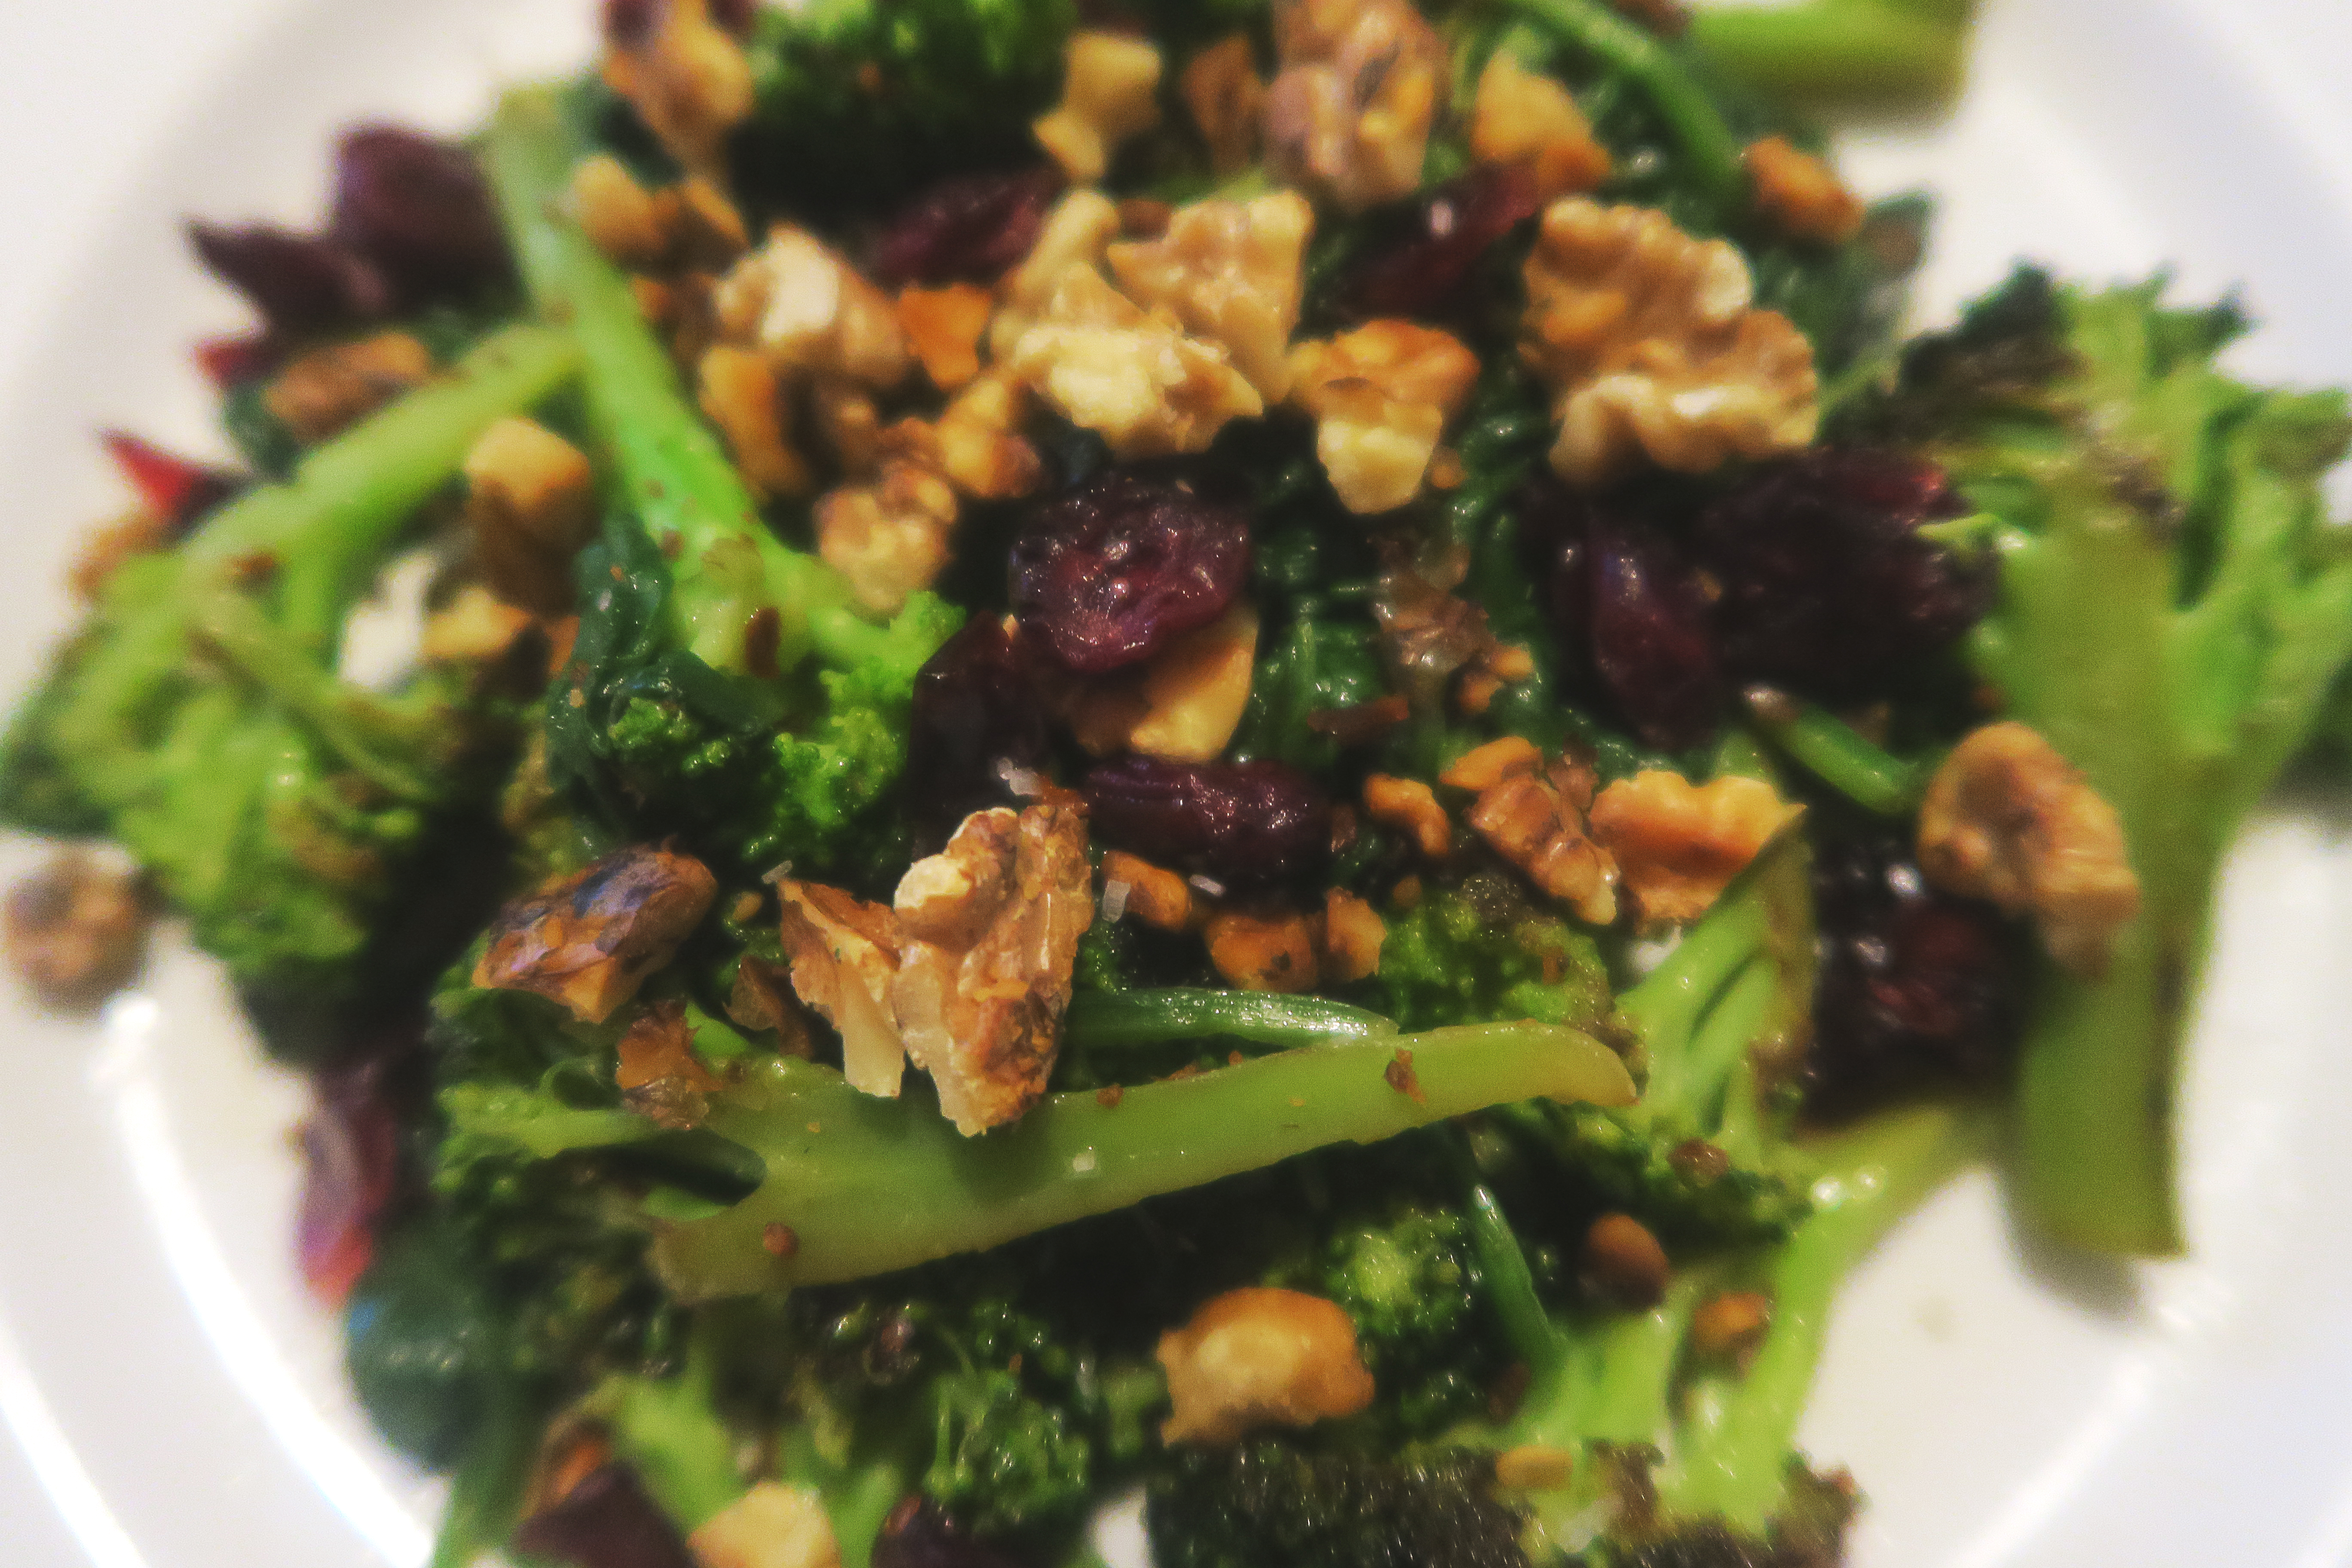 Broccoli and Spinach with Walnuts and Dried Cranberries